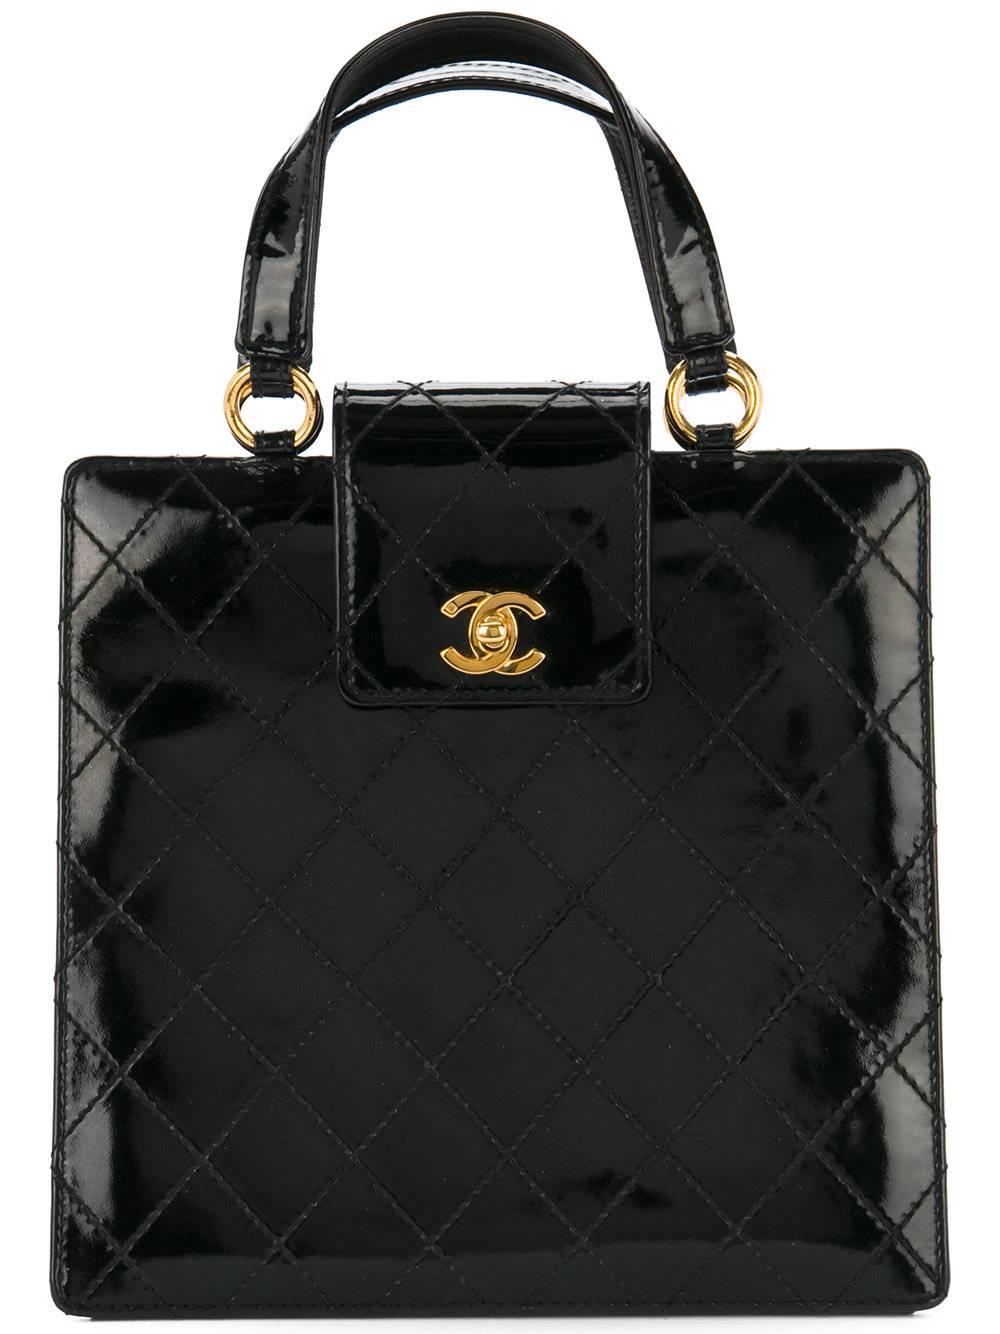 Chanel Vintage Black Patent Leather Top Handle Satchel Evening Bag In Good Condition In Chicago, IL